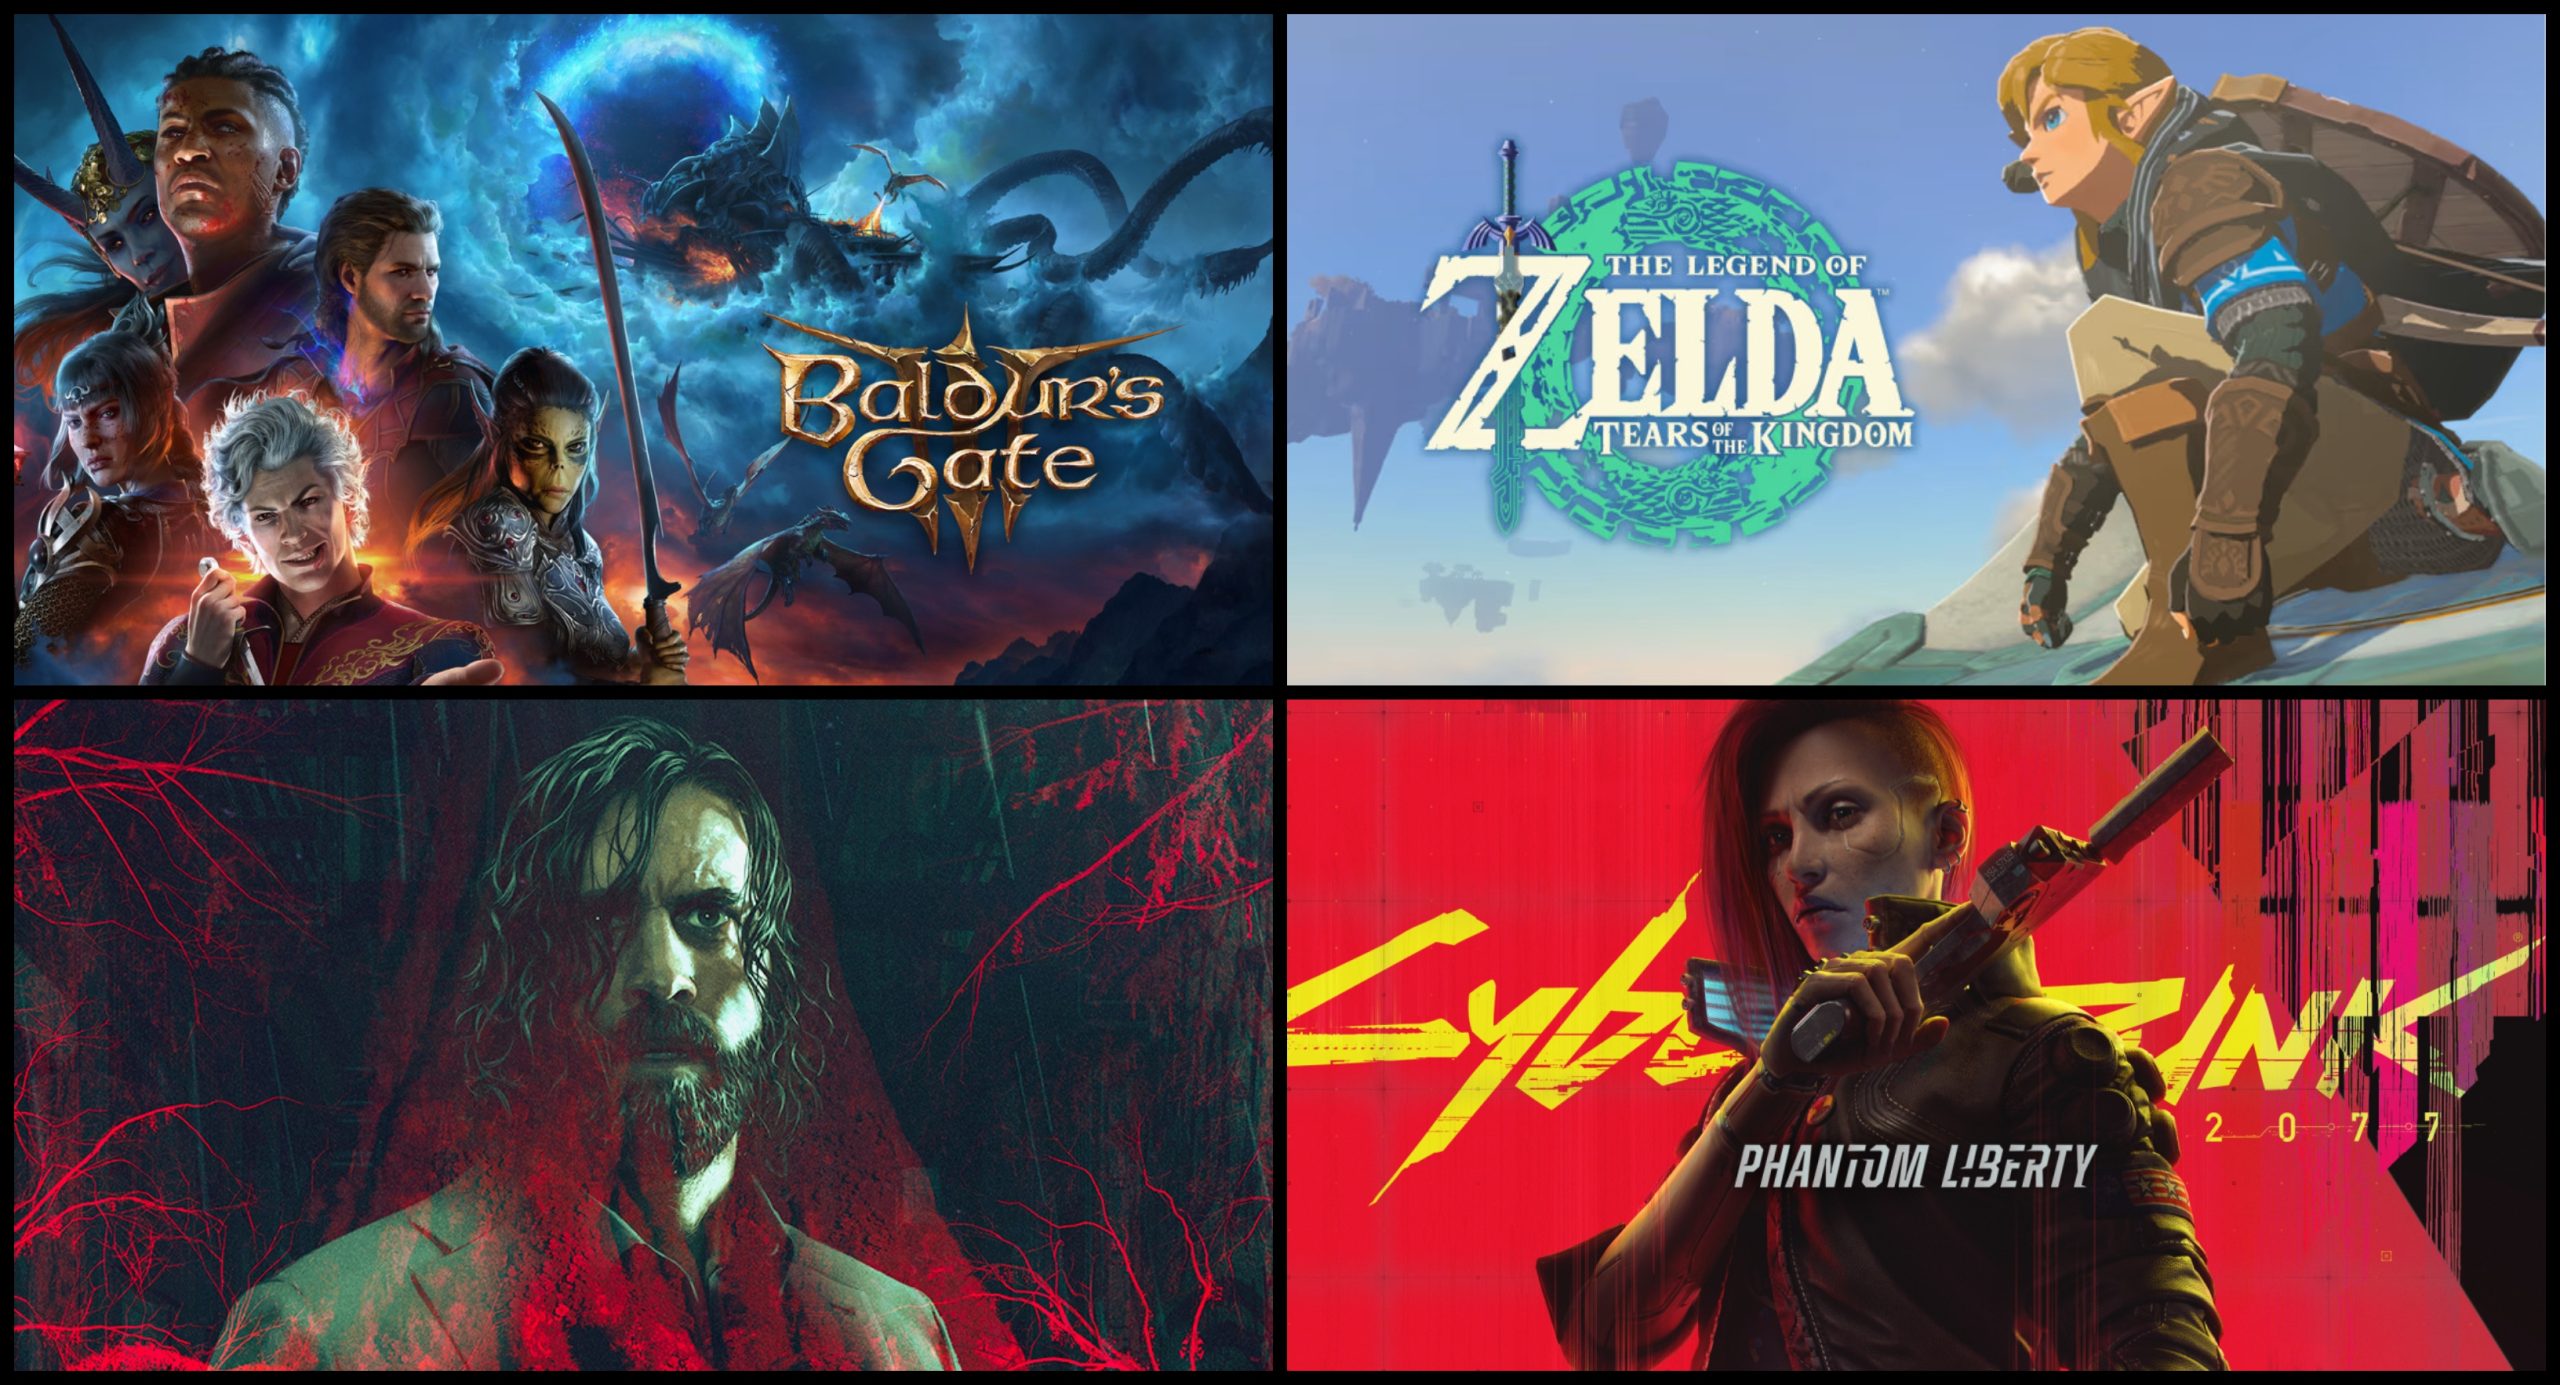 START  SELECT: Hope, Despair in 'Ocarina of Time